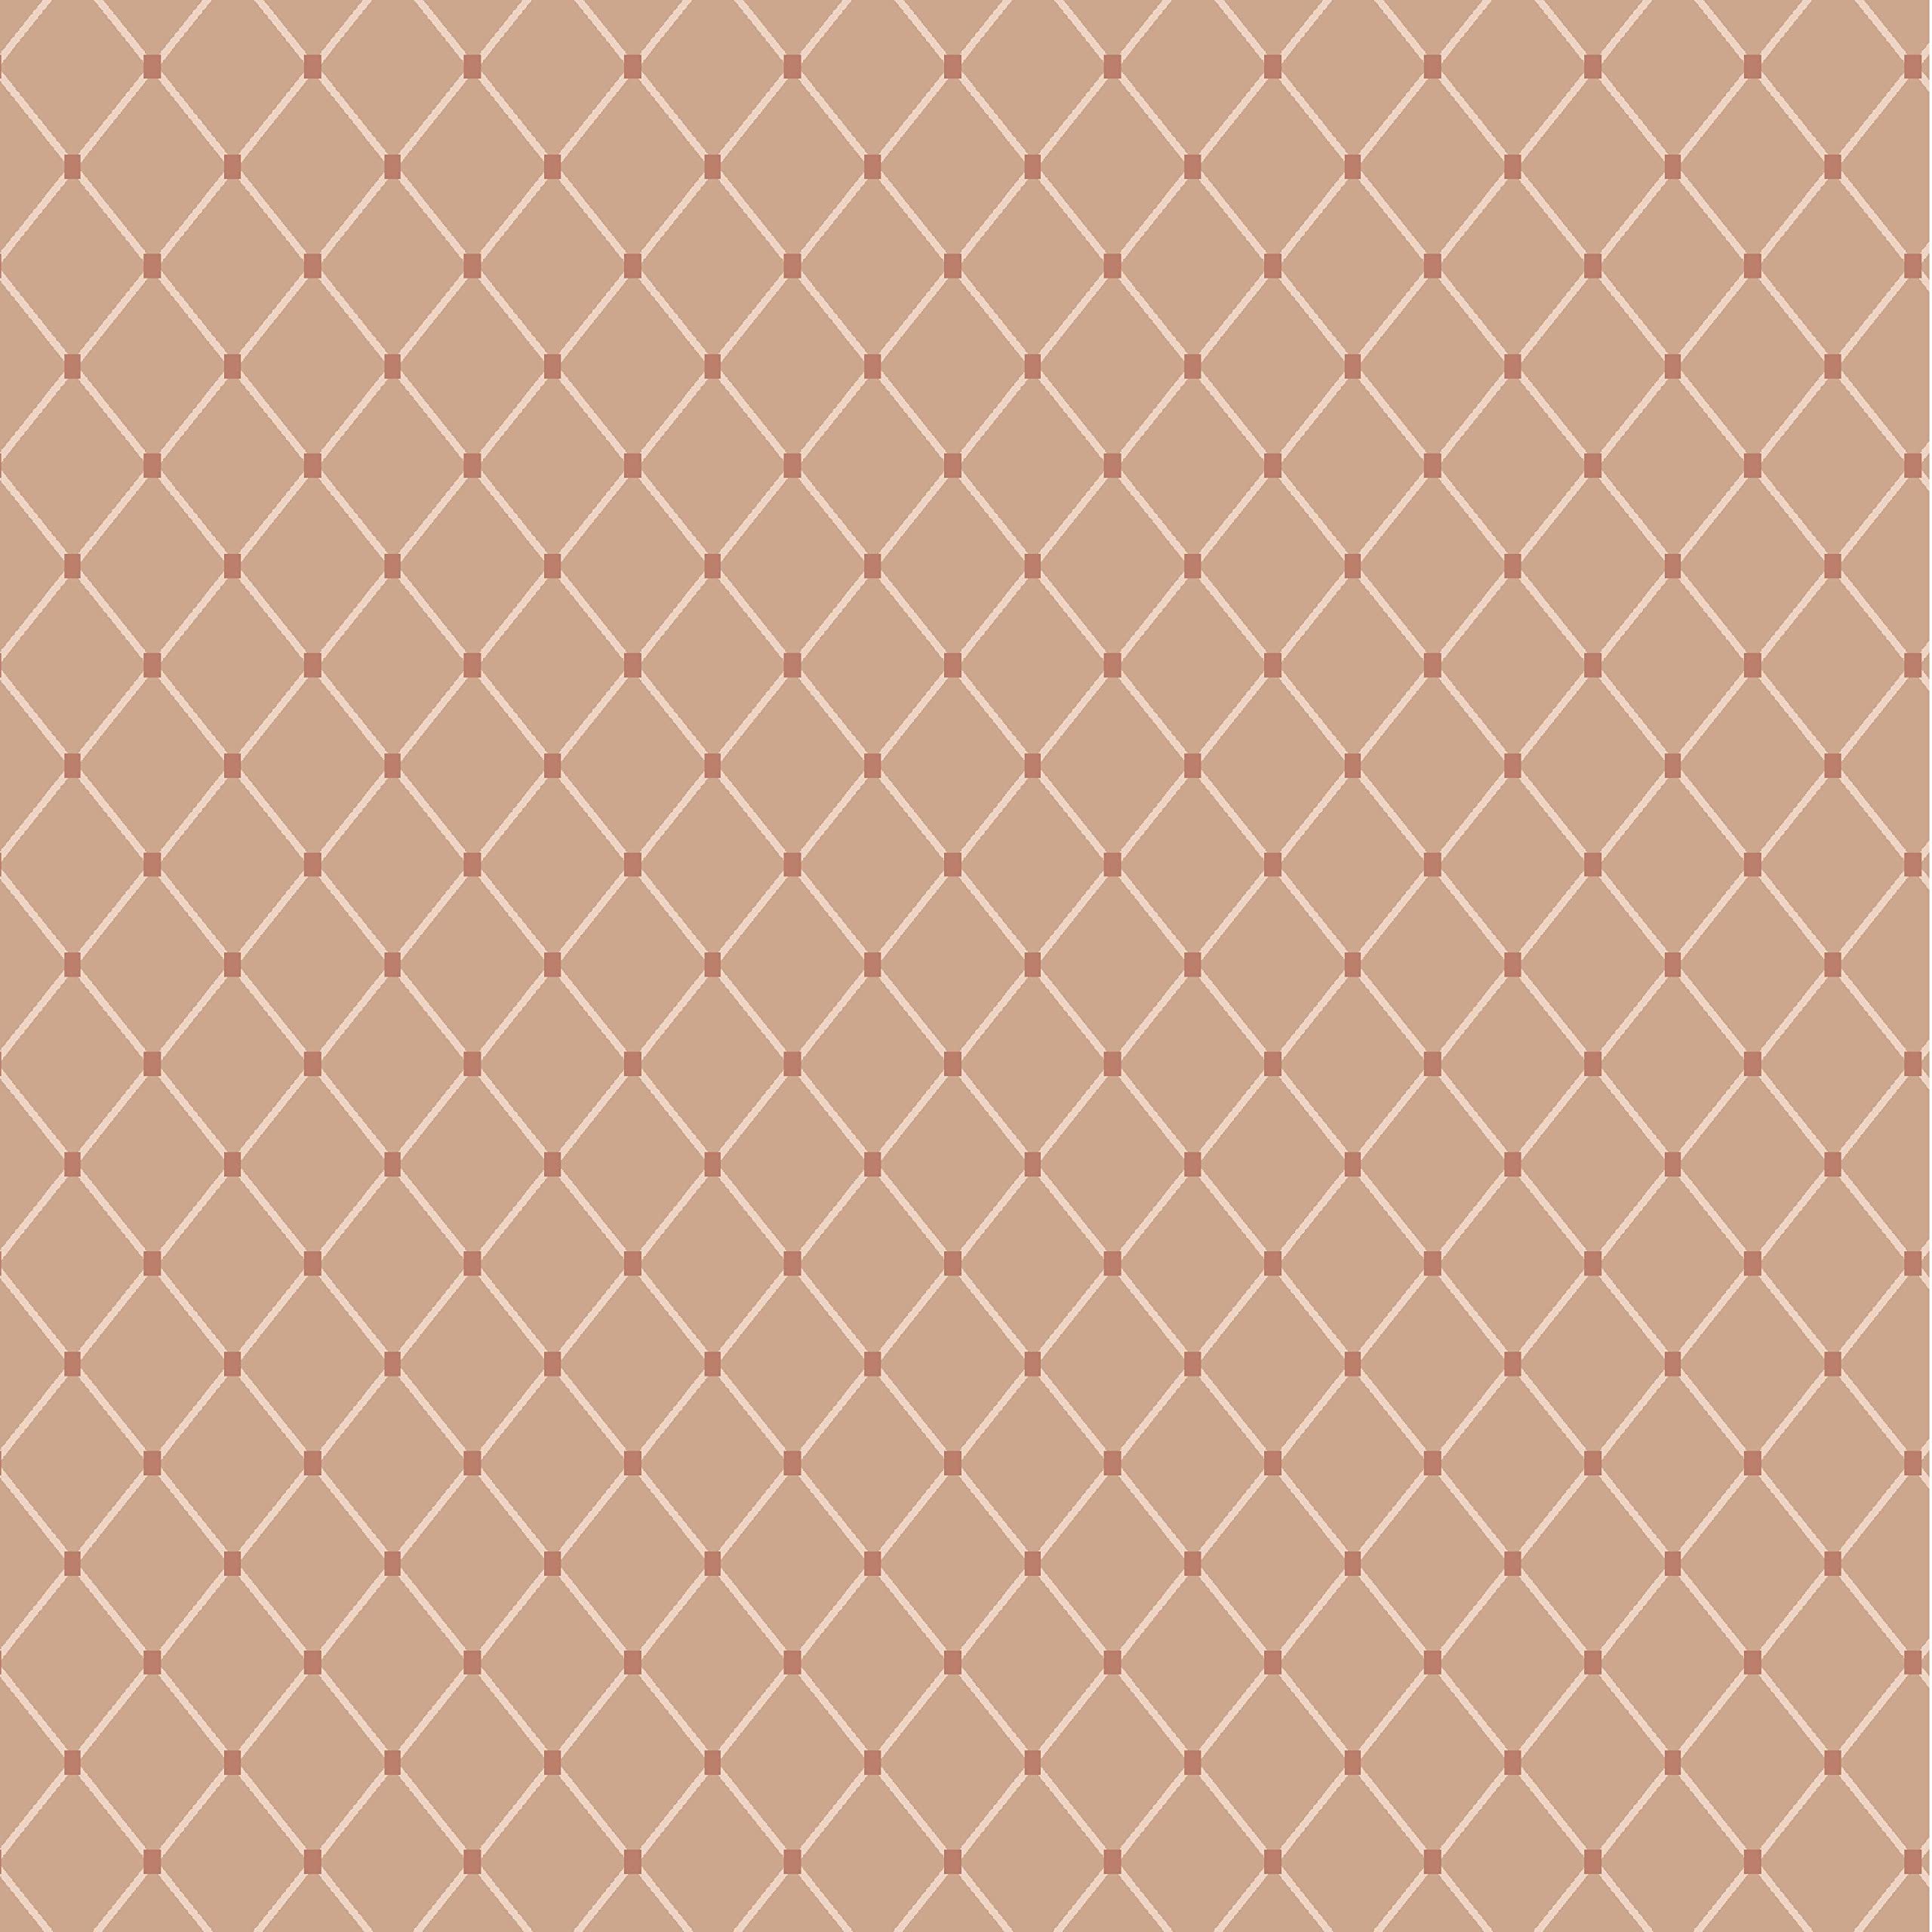 Stitch & Sparkles 100% Cotton Duck 45" Width Diamond Rose Color Sewing Fabric by The Yard